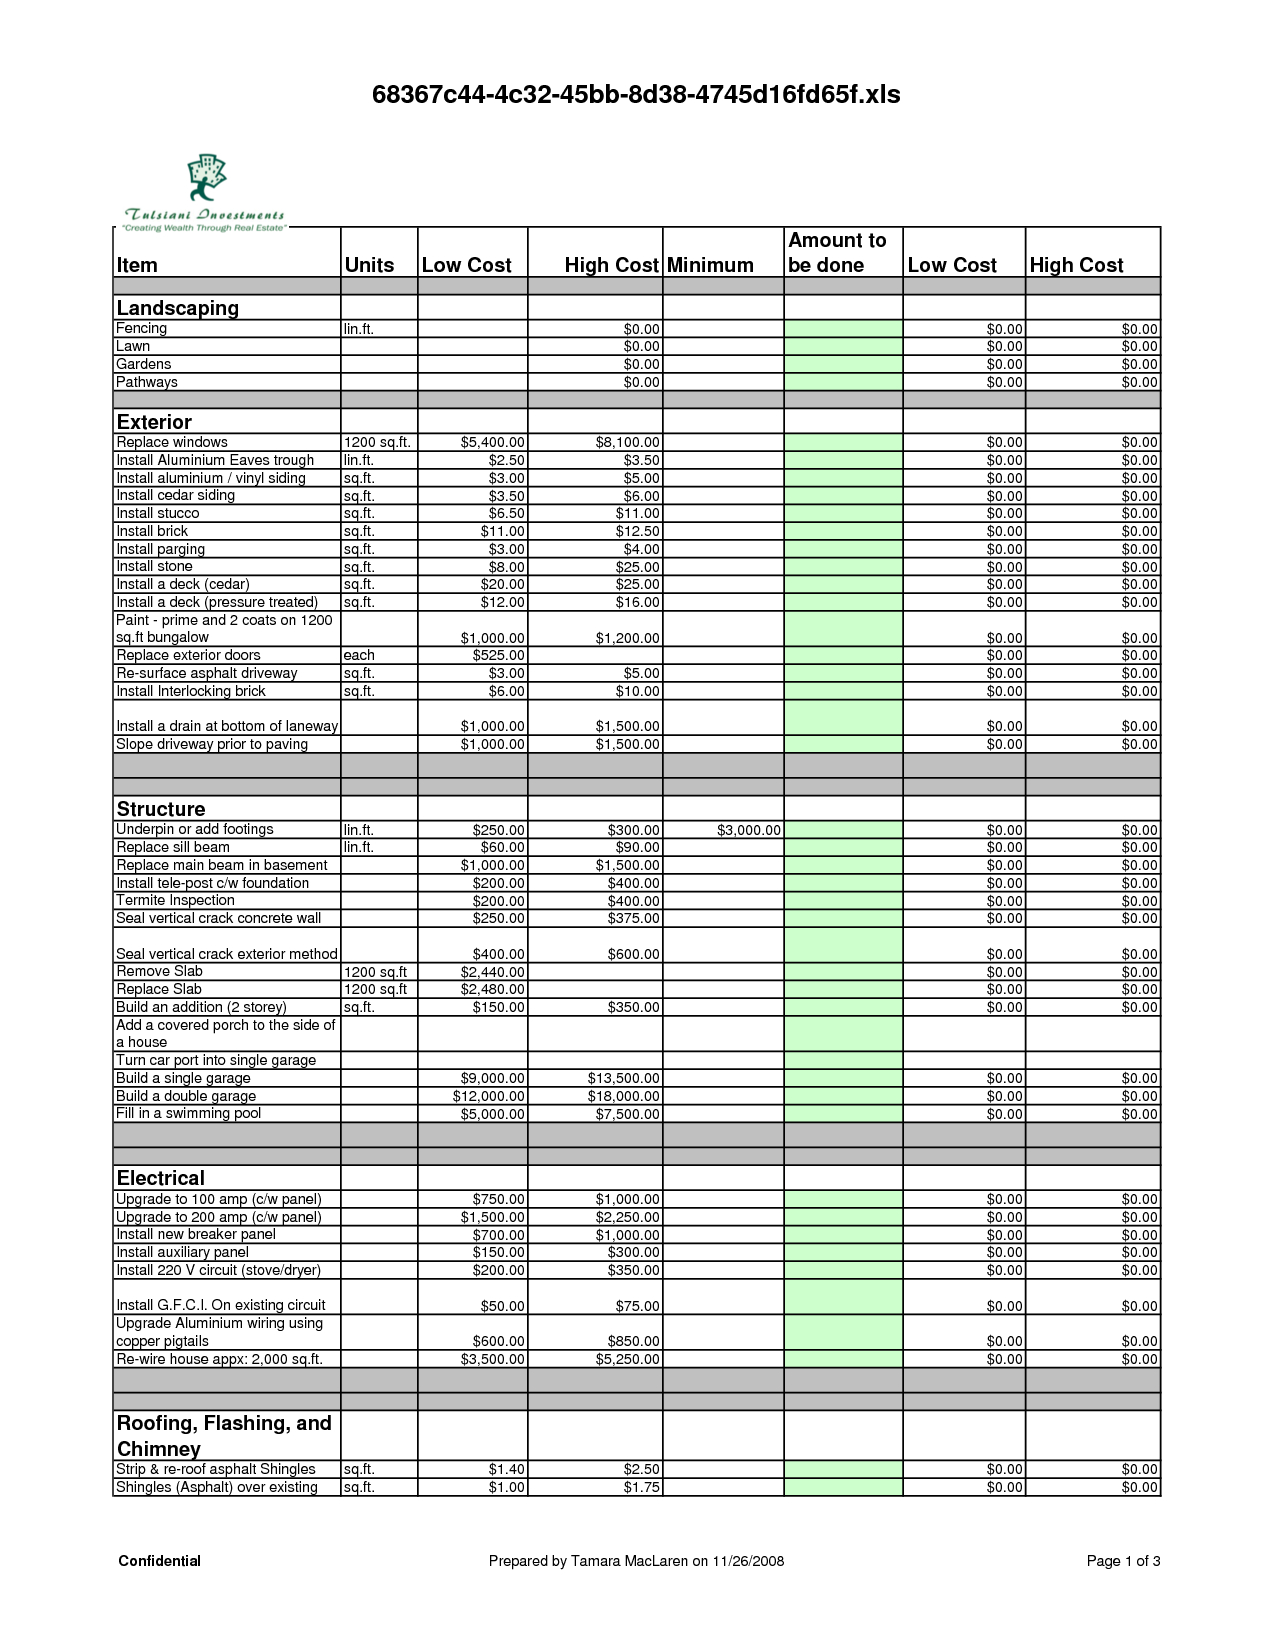 Project Cost Estimating Spreadsheet Templates For Excel Inside Estimating Spreadsheets In Excel Free Estimating Spreadsheet